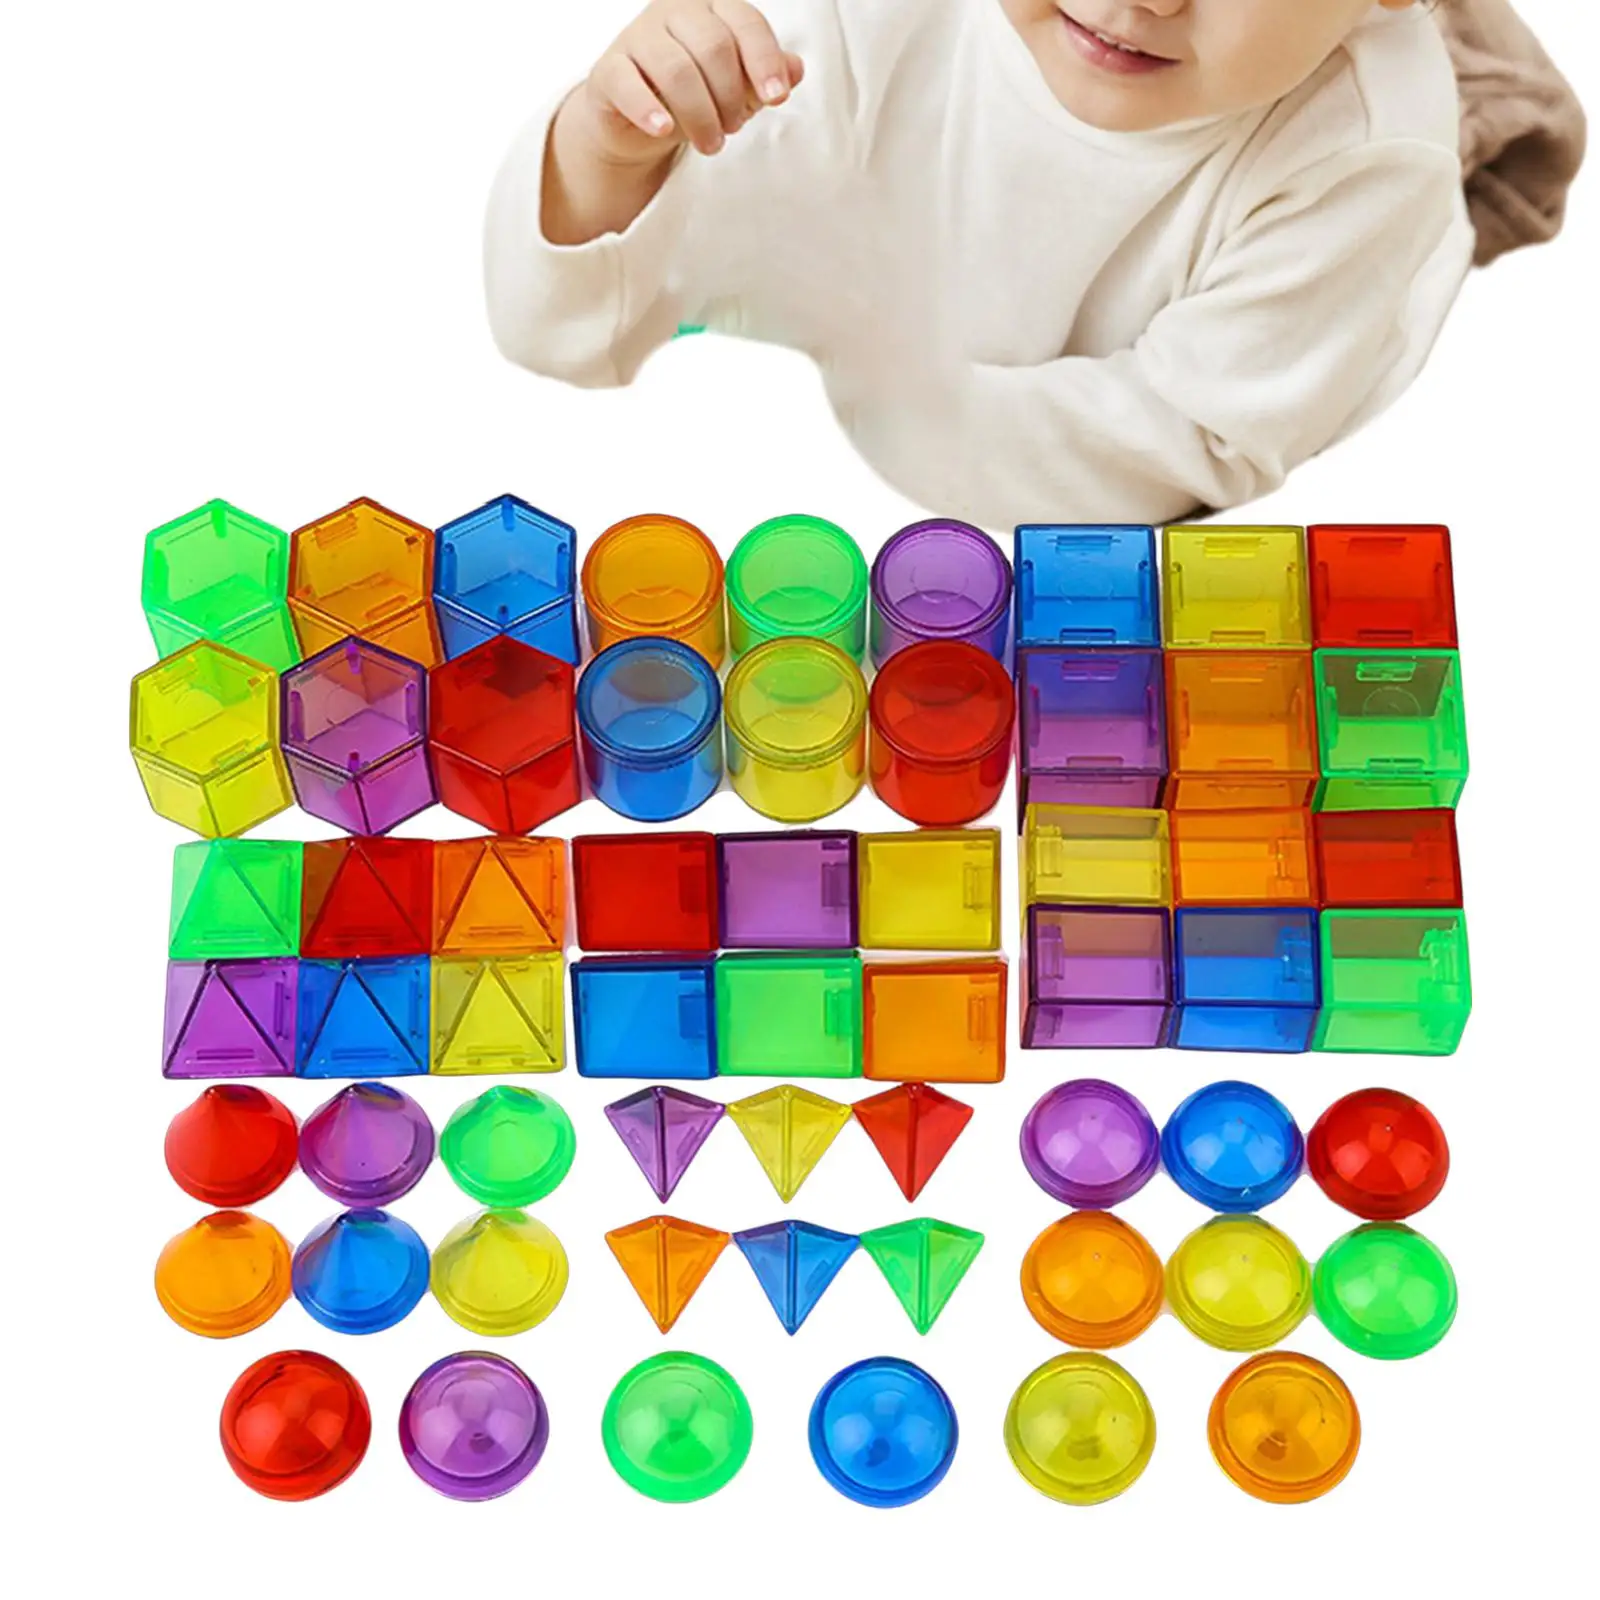 Small Geometric Solids Educational Toys Sensory Parent Child Interaction Montessori Toys Puzzled For Gifts Living Room Children